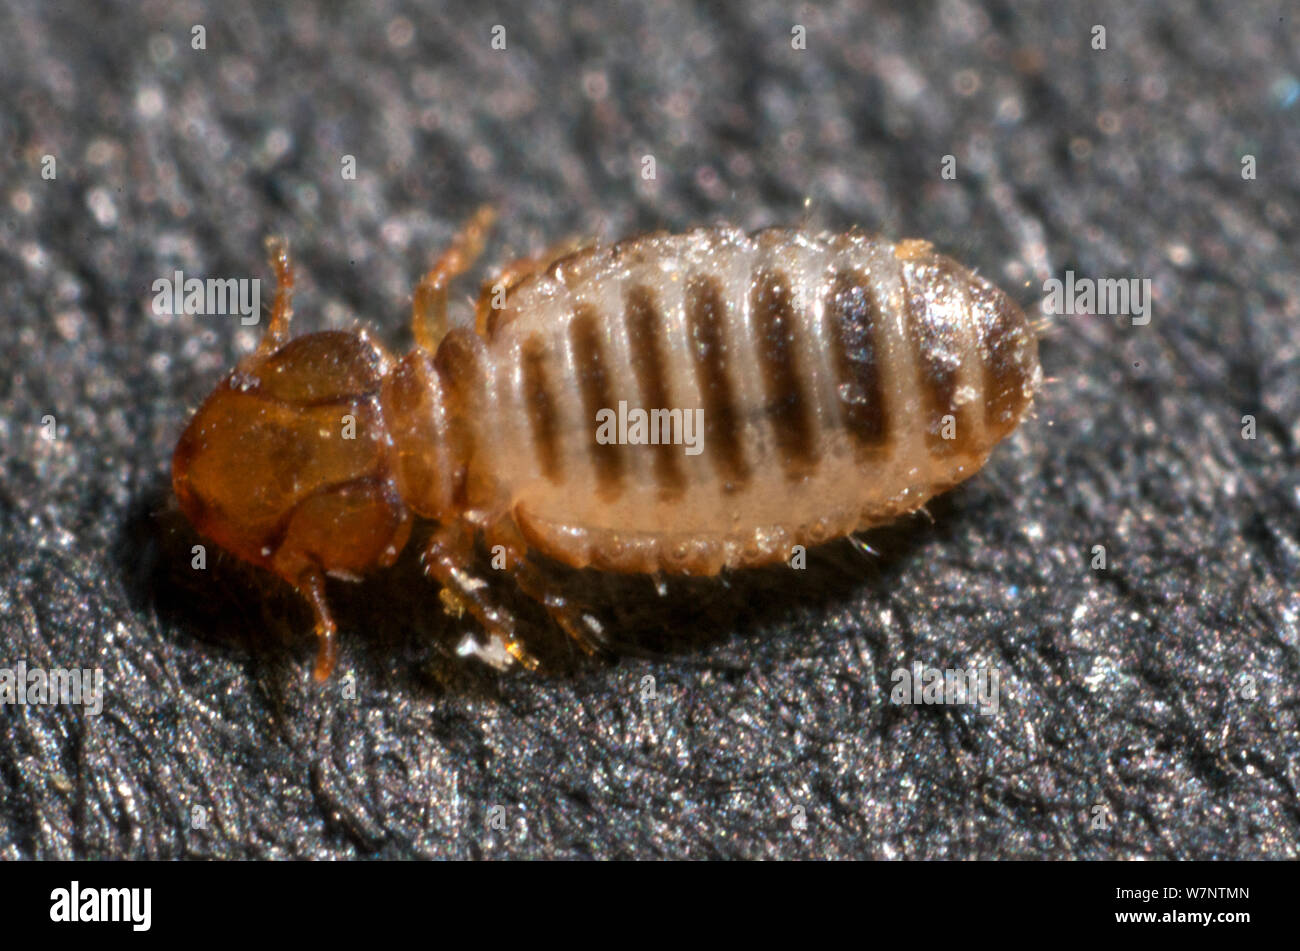 Cattle biting louse (Damalinia bovis) in temperate climates cattle may be infested with this species of Mallophaga. Length 3mm approximately Stock Photo